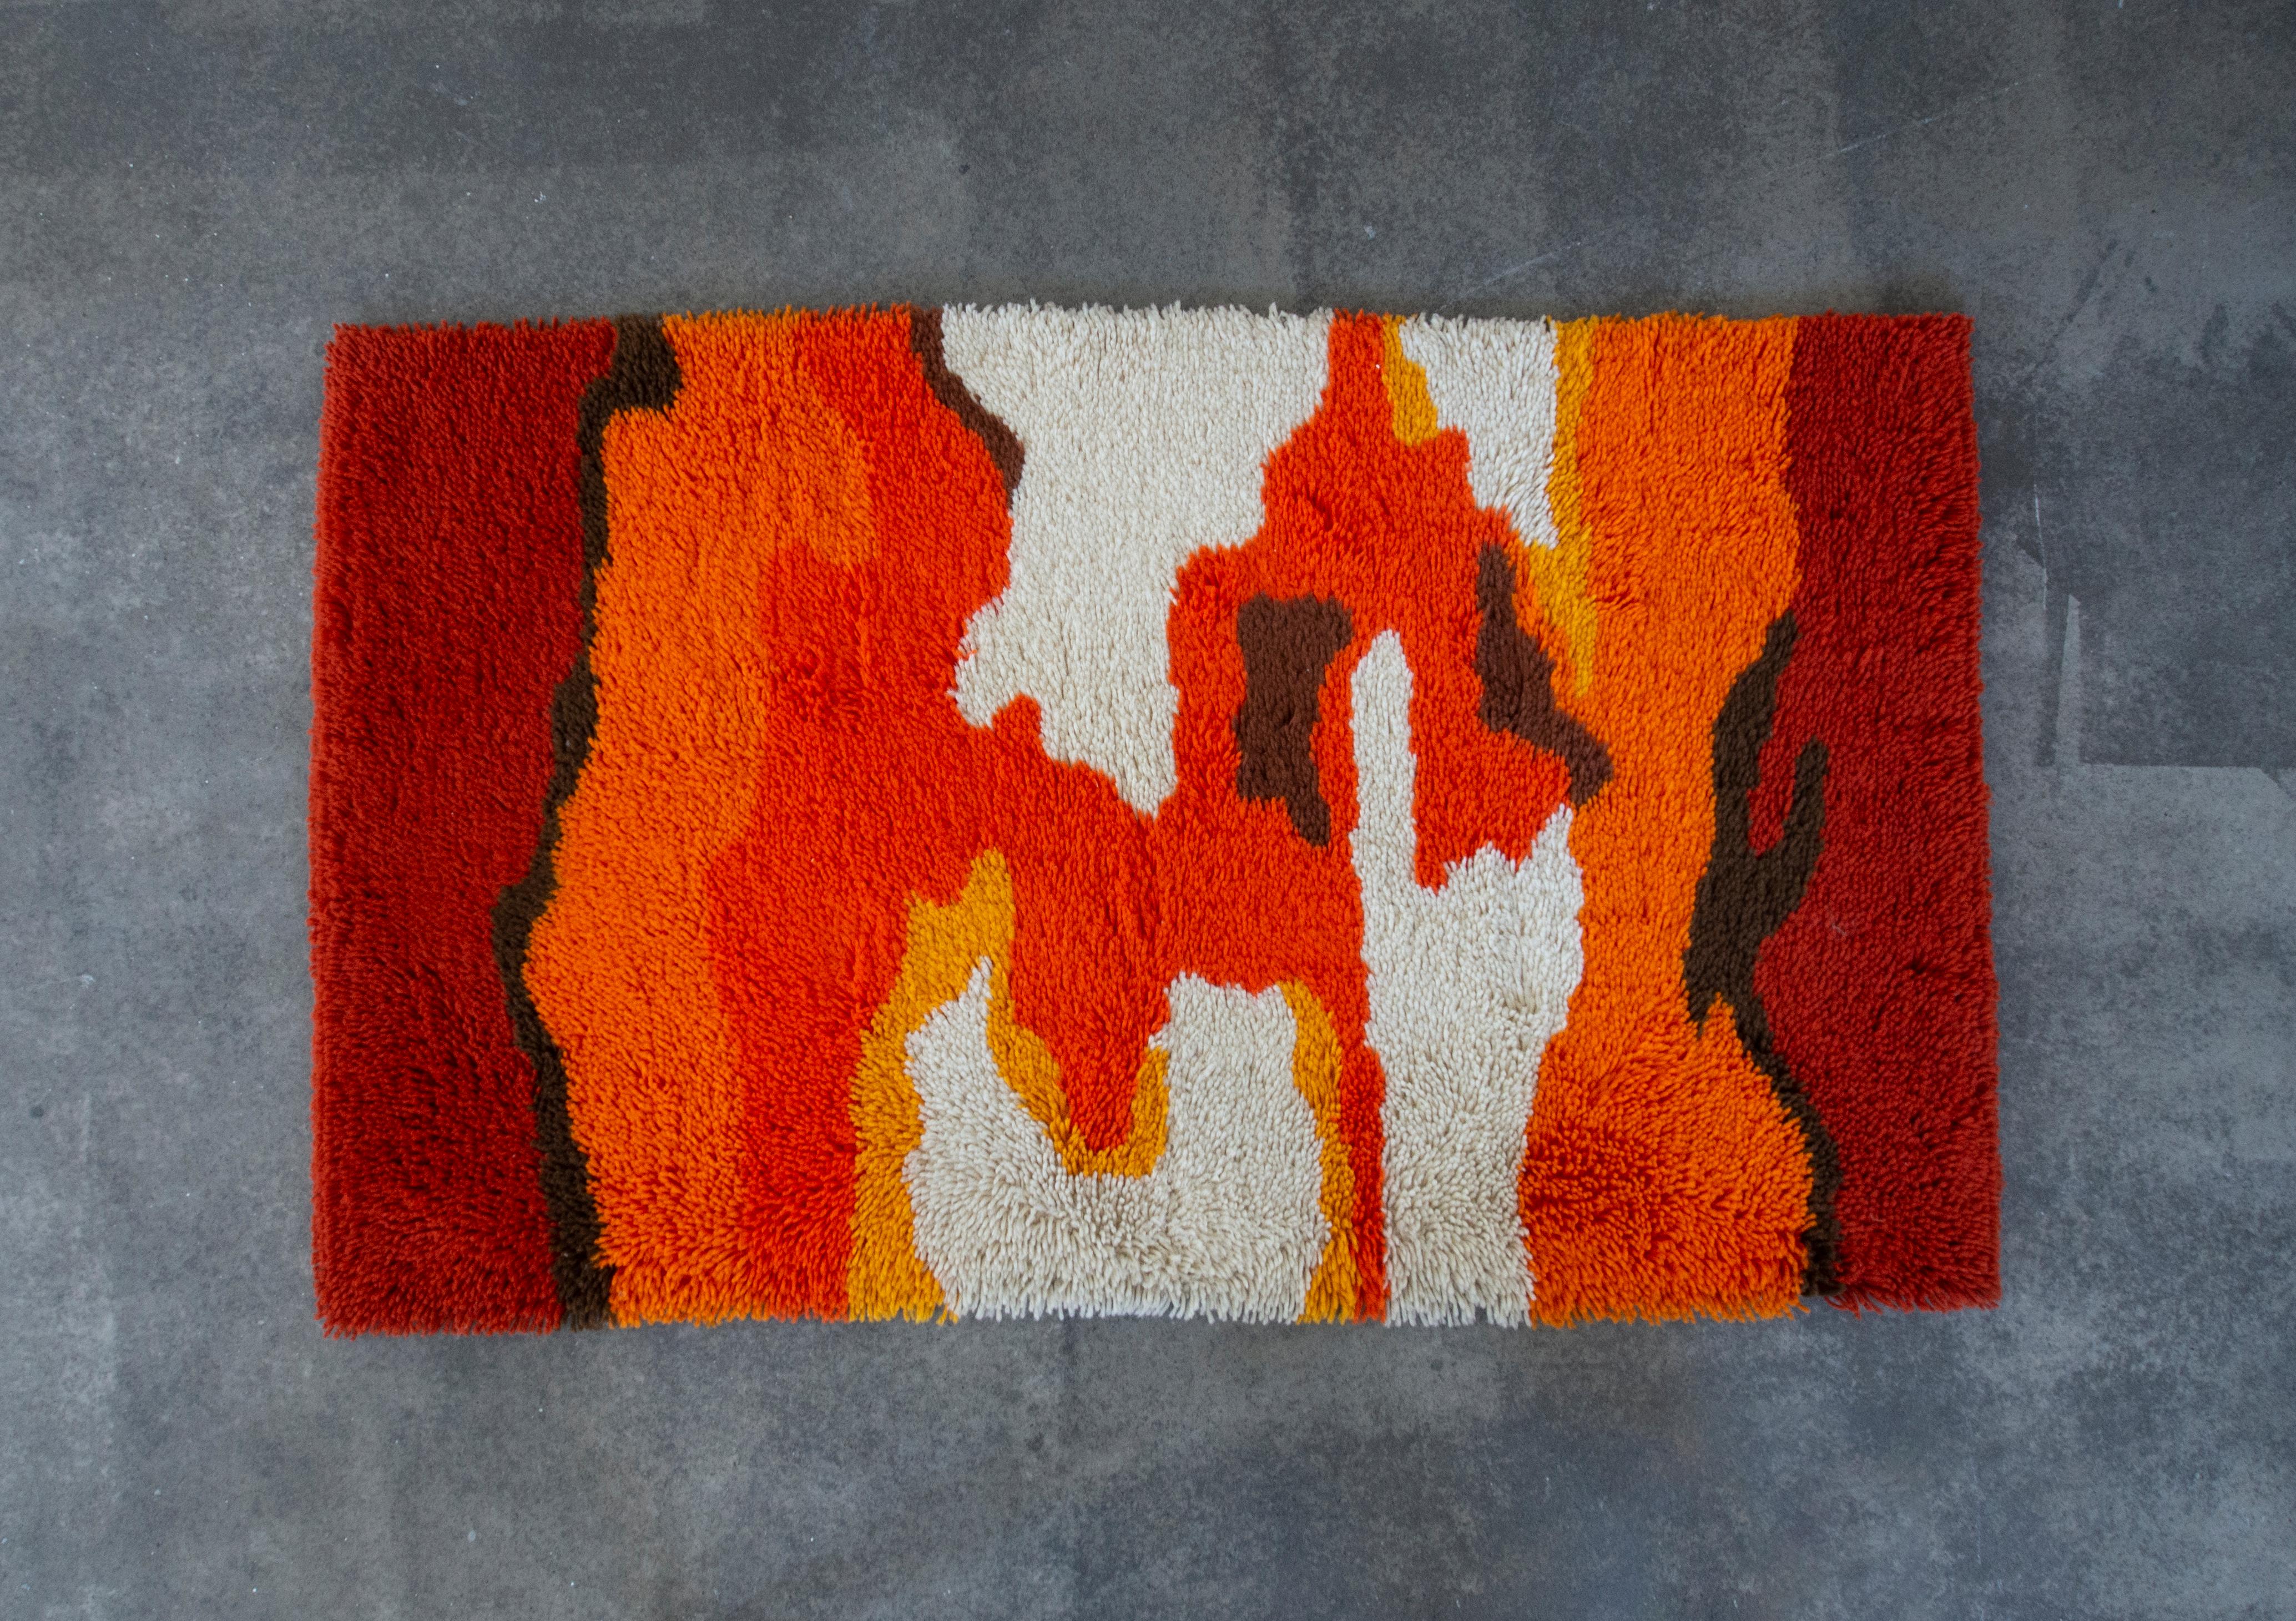 In this listing you will find a beautiful, vibrant Rya Rug in yellow, orange, red, brown and white. It features long threads, creating a fluffy feeling bellow your feet. There is an organic flow of the colors, creating a warm and welcoming feeling